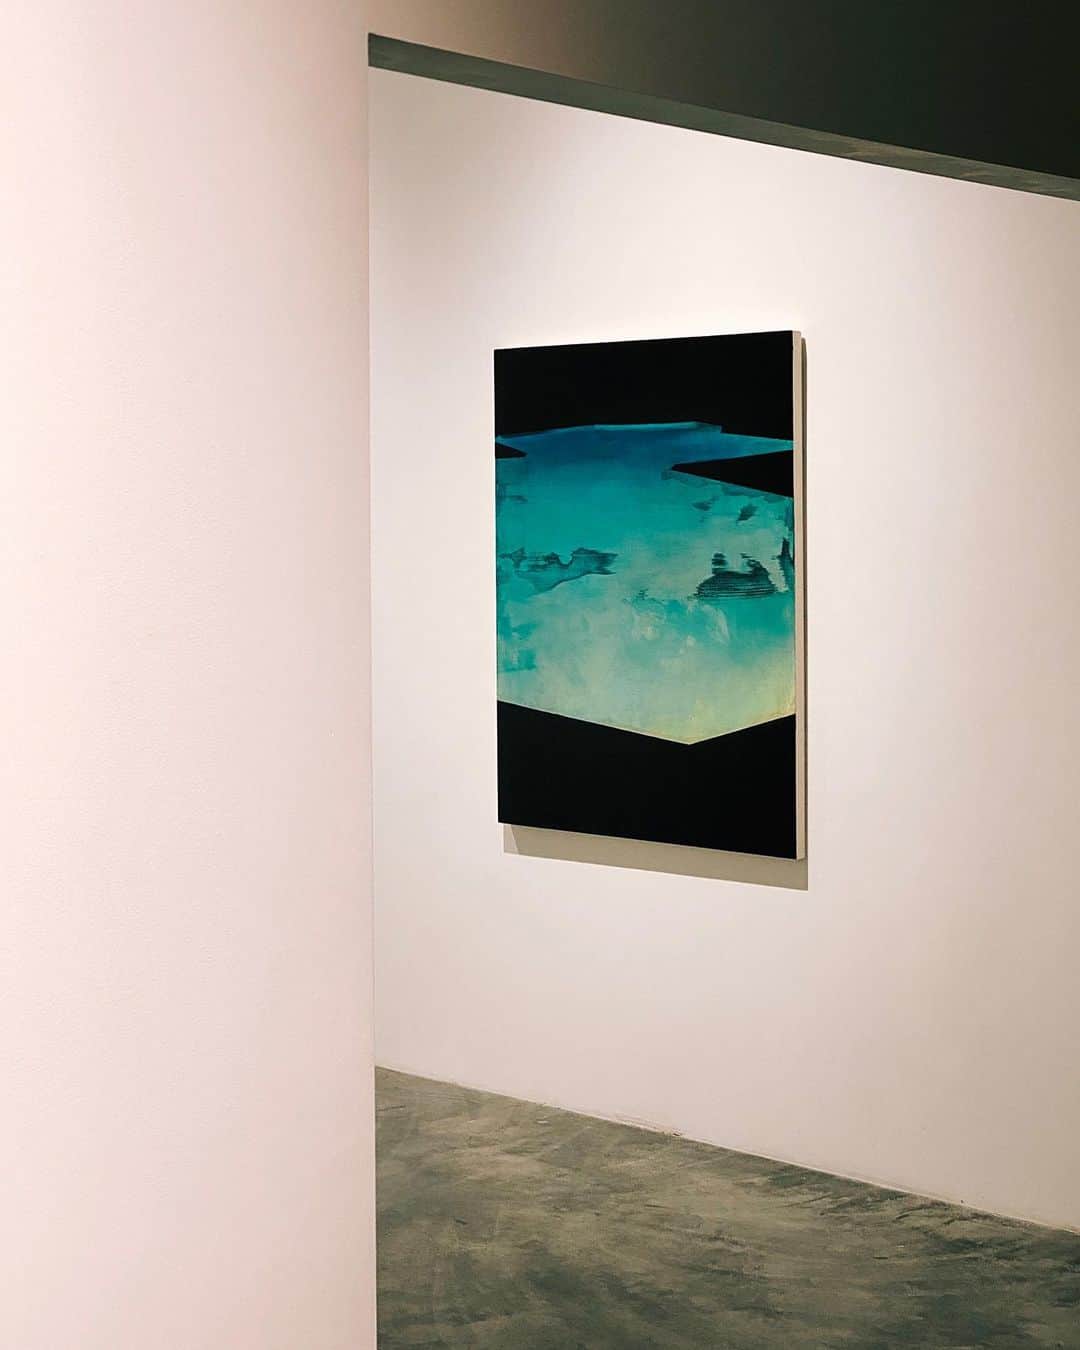 Robert Bingamanのインスタグラム：「I interrupt my sabbatical from all media to invite you to see this show, masked and alone, at some point during the next seven days—before it closes. Some words of a close friend:  Rob’s paintings. Much will be made of the subject matter, the fires. That’s fine. It’s hard not to feel the heat emanating from those canvases, the same heat curdling the headlines. But these paintings are evocative of the times beyond the contents. The sight of fires and damage is not just depicted in the paintings, it’s a component of the technique. On first glance the pool is swiped with painterly’ “noise,” a la Richter, but the impression it leaves on the viewer is that of a scar. For someone who has seen Rob paint these scenes for nearly a decade, it’s jarring, like seeing an old friend or family member emerge from a health crisis with a from-this-point-on distinguishing scar. It’s how they look now. How we all look in 2020, and certainly after. So hard to believe we’re still in it, but not in the small room where Rob’s paintings are displayed. It’s the most intimate public space I’ve been in in months. If Rob’s pieces have been critiqued as a reflection of privilege, a claim that may or may not have merit or be immaterial, he also shows that these objects are not immune to erosion, decay, or even complete destruction. Rob’s paintings have always existed in their own plane, so it’s striking to see them altered, to see that this plane is also subject to the same rules of physics as our real-world landmarks. Not because it’s such a foreign experience, but because it’s so recognizable. We are all scarred by this year, we recognize our own crises and traumas in these pigments. The artist depicts but does not judge, our damage is safely contained within the contemplation of each scene, which in other circumstances or conditions might be beautiful. But that is not the timeline we were given. So here we are, huddled apart for warmth, scared and shaken but also beginning to suspect that we can survive/"overlive" the gray months as long as fireworks of color like these adorn the walls of the gallery, and even in our darkest moments, continue to exist and shine and even thrive. - LW」